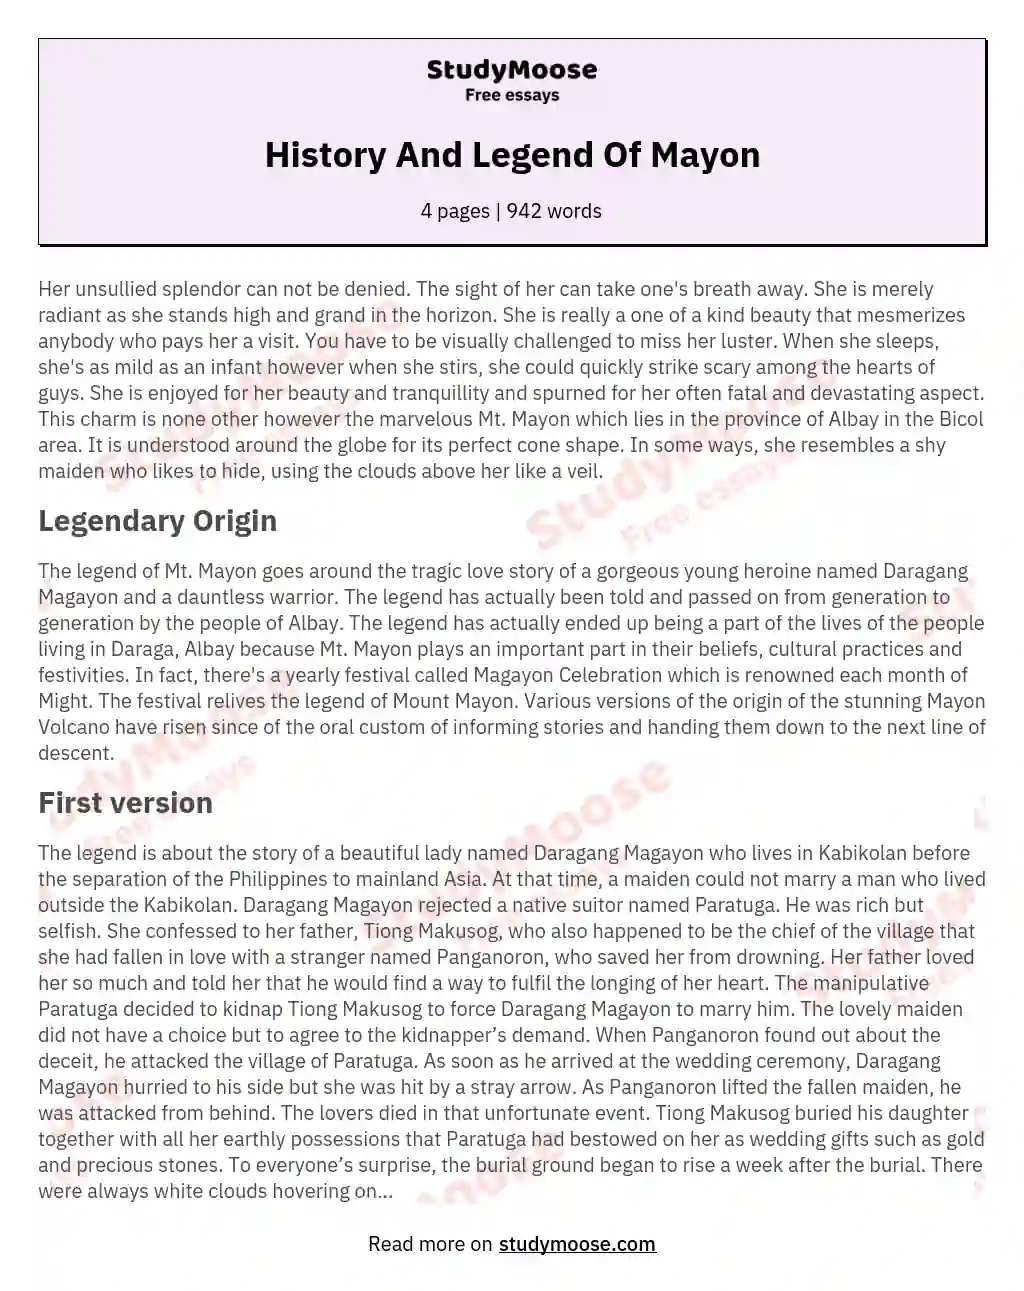 History And Legend Of Mayon essay